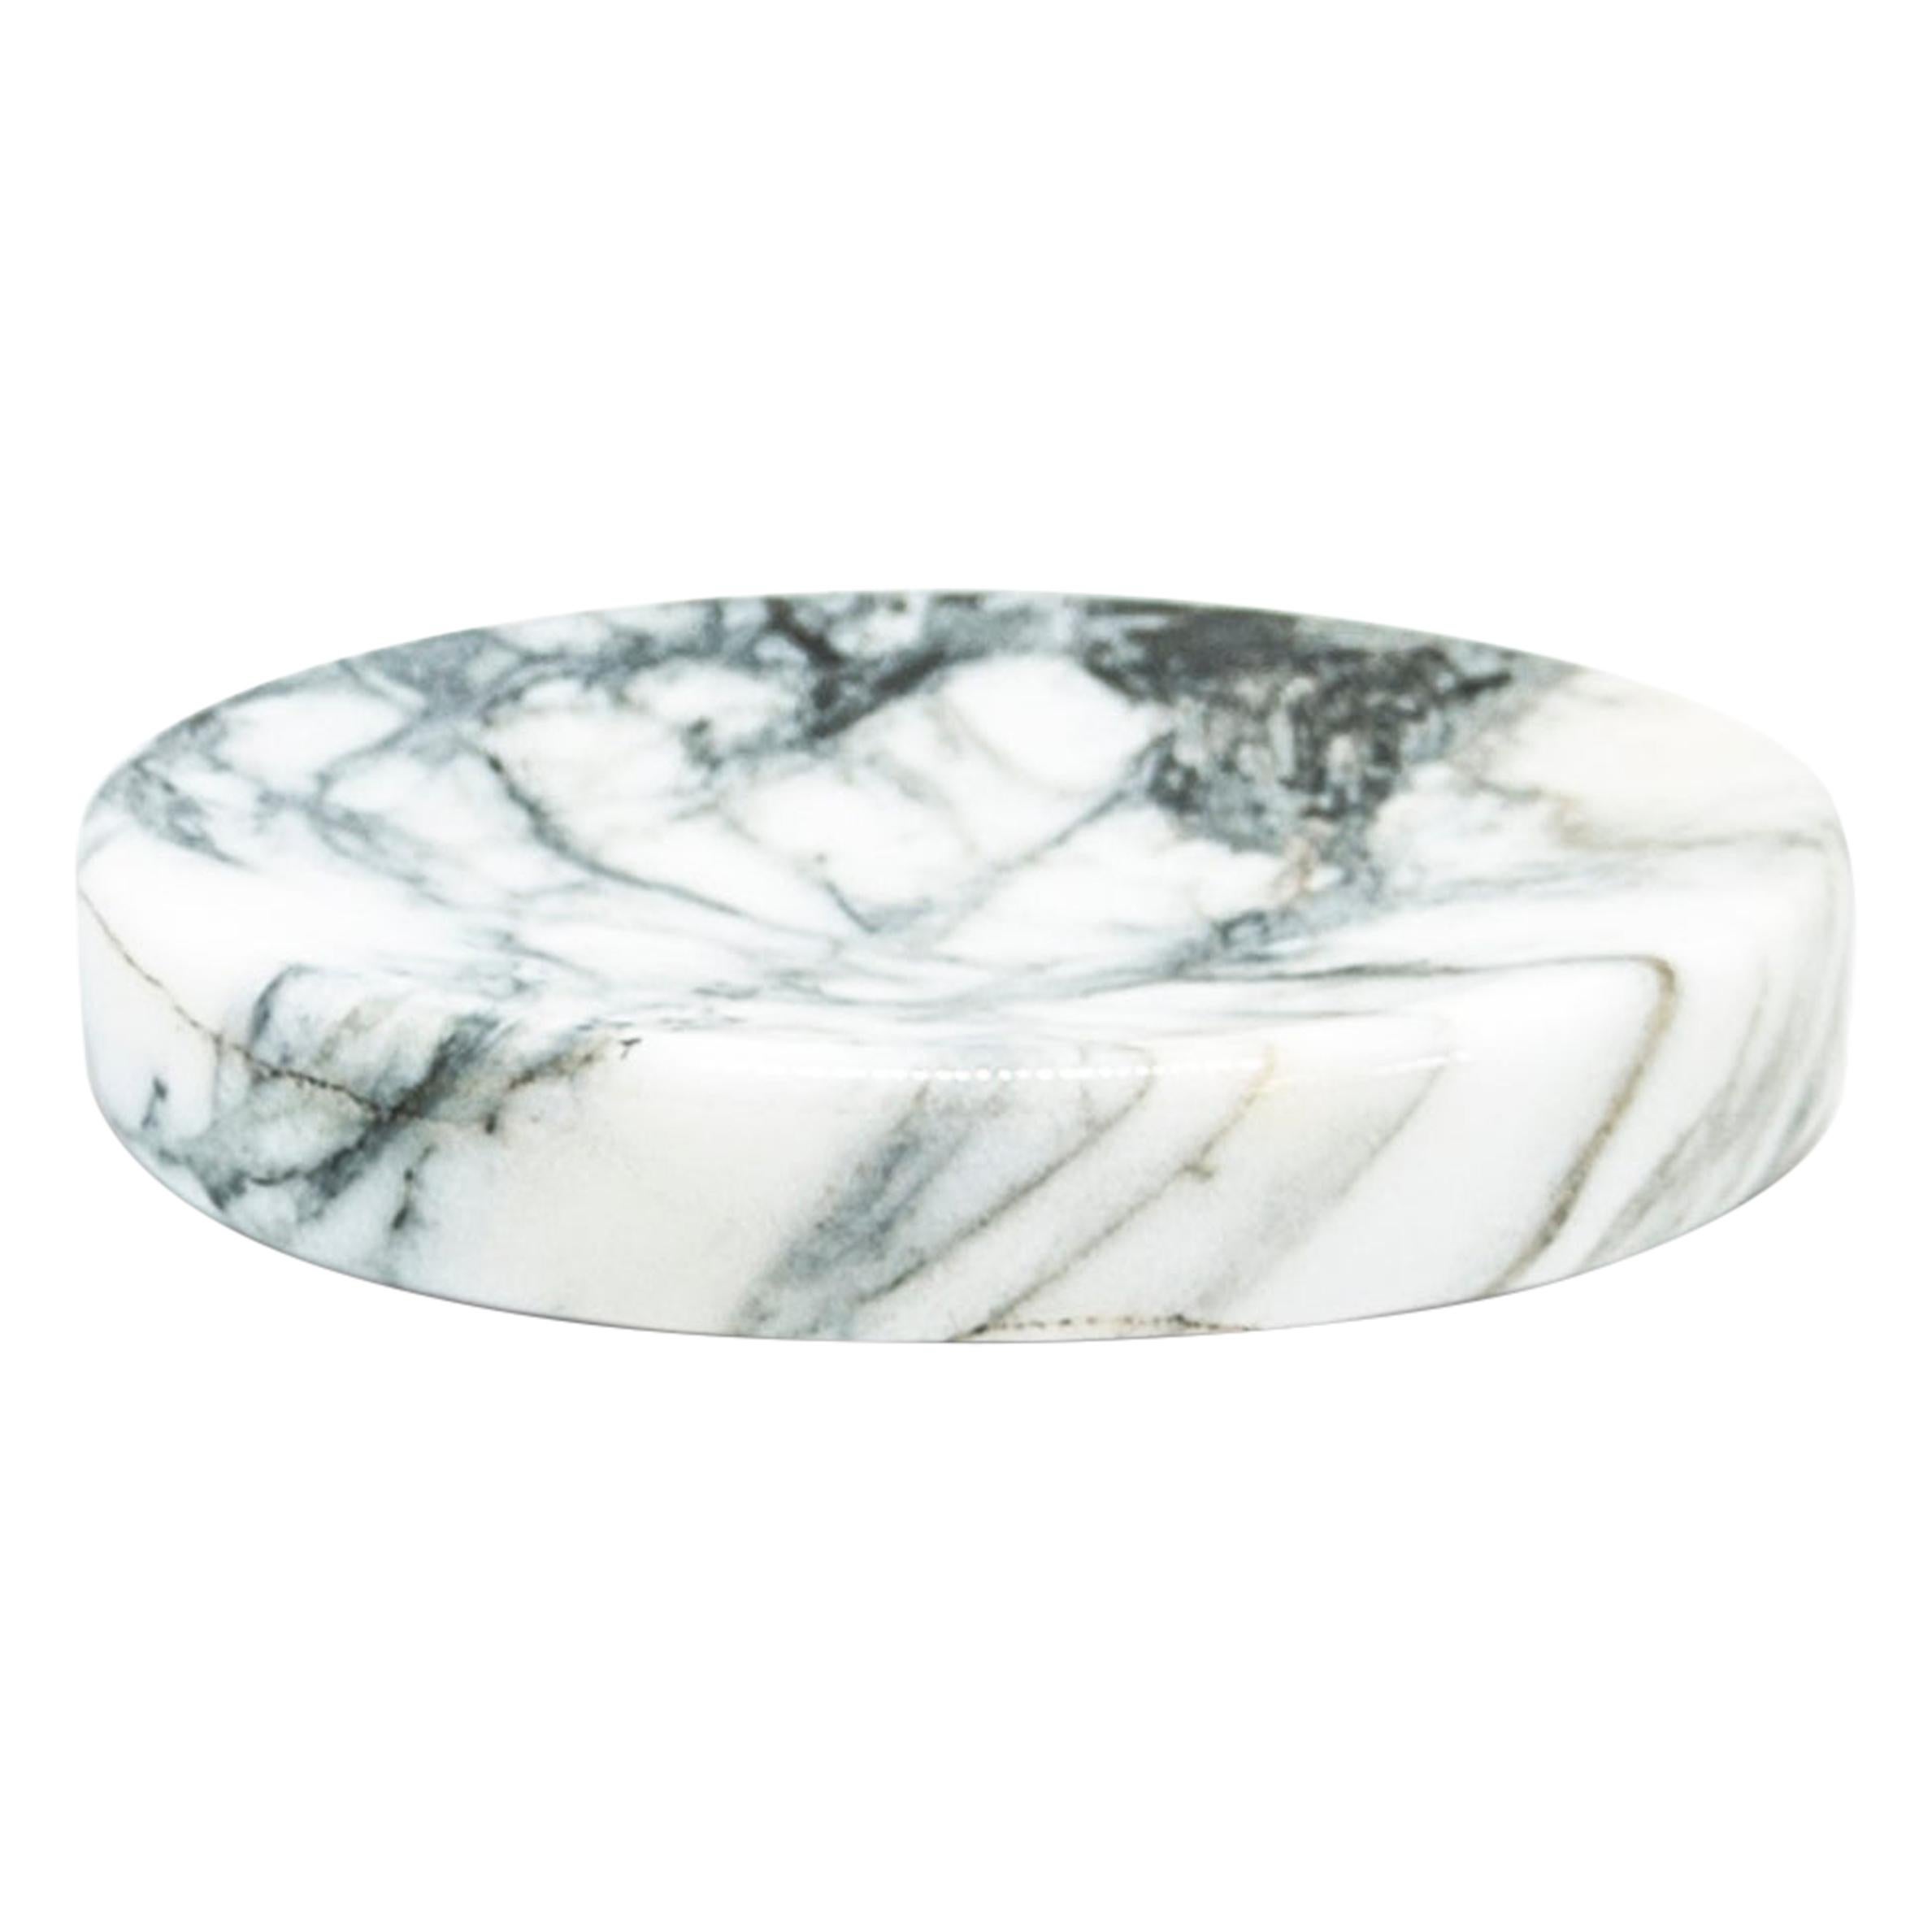 Handmade Rounded Soap Dish in Paonazzo Marble